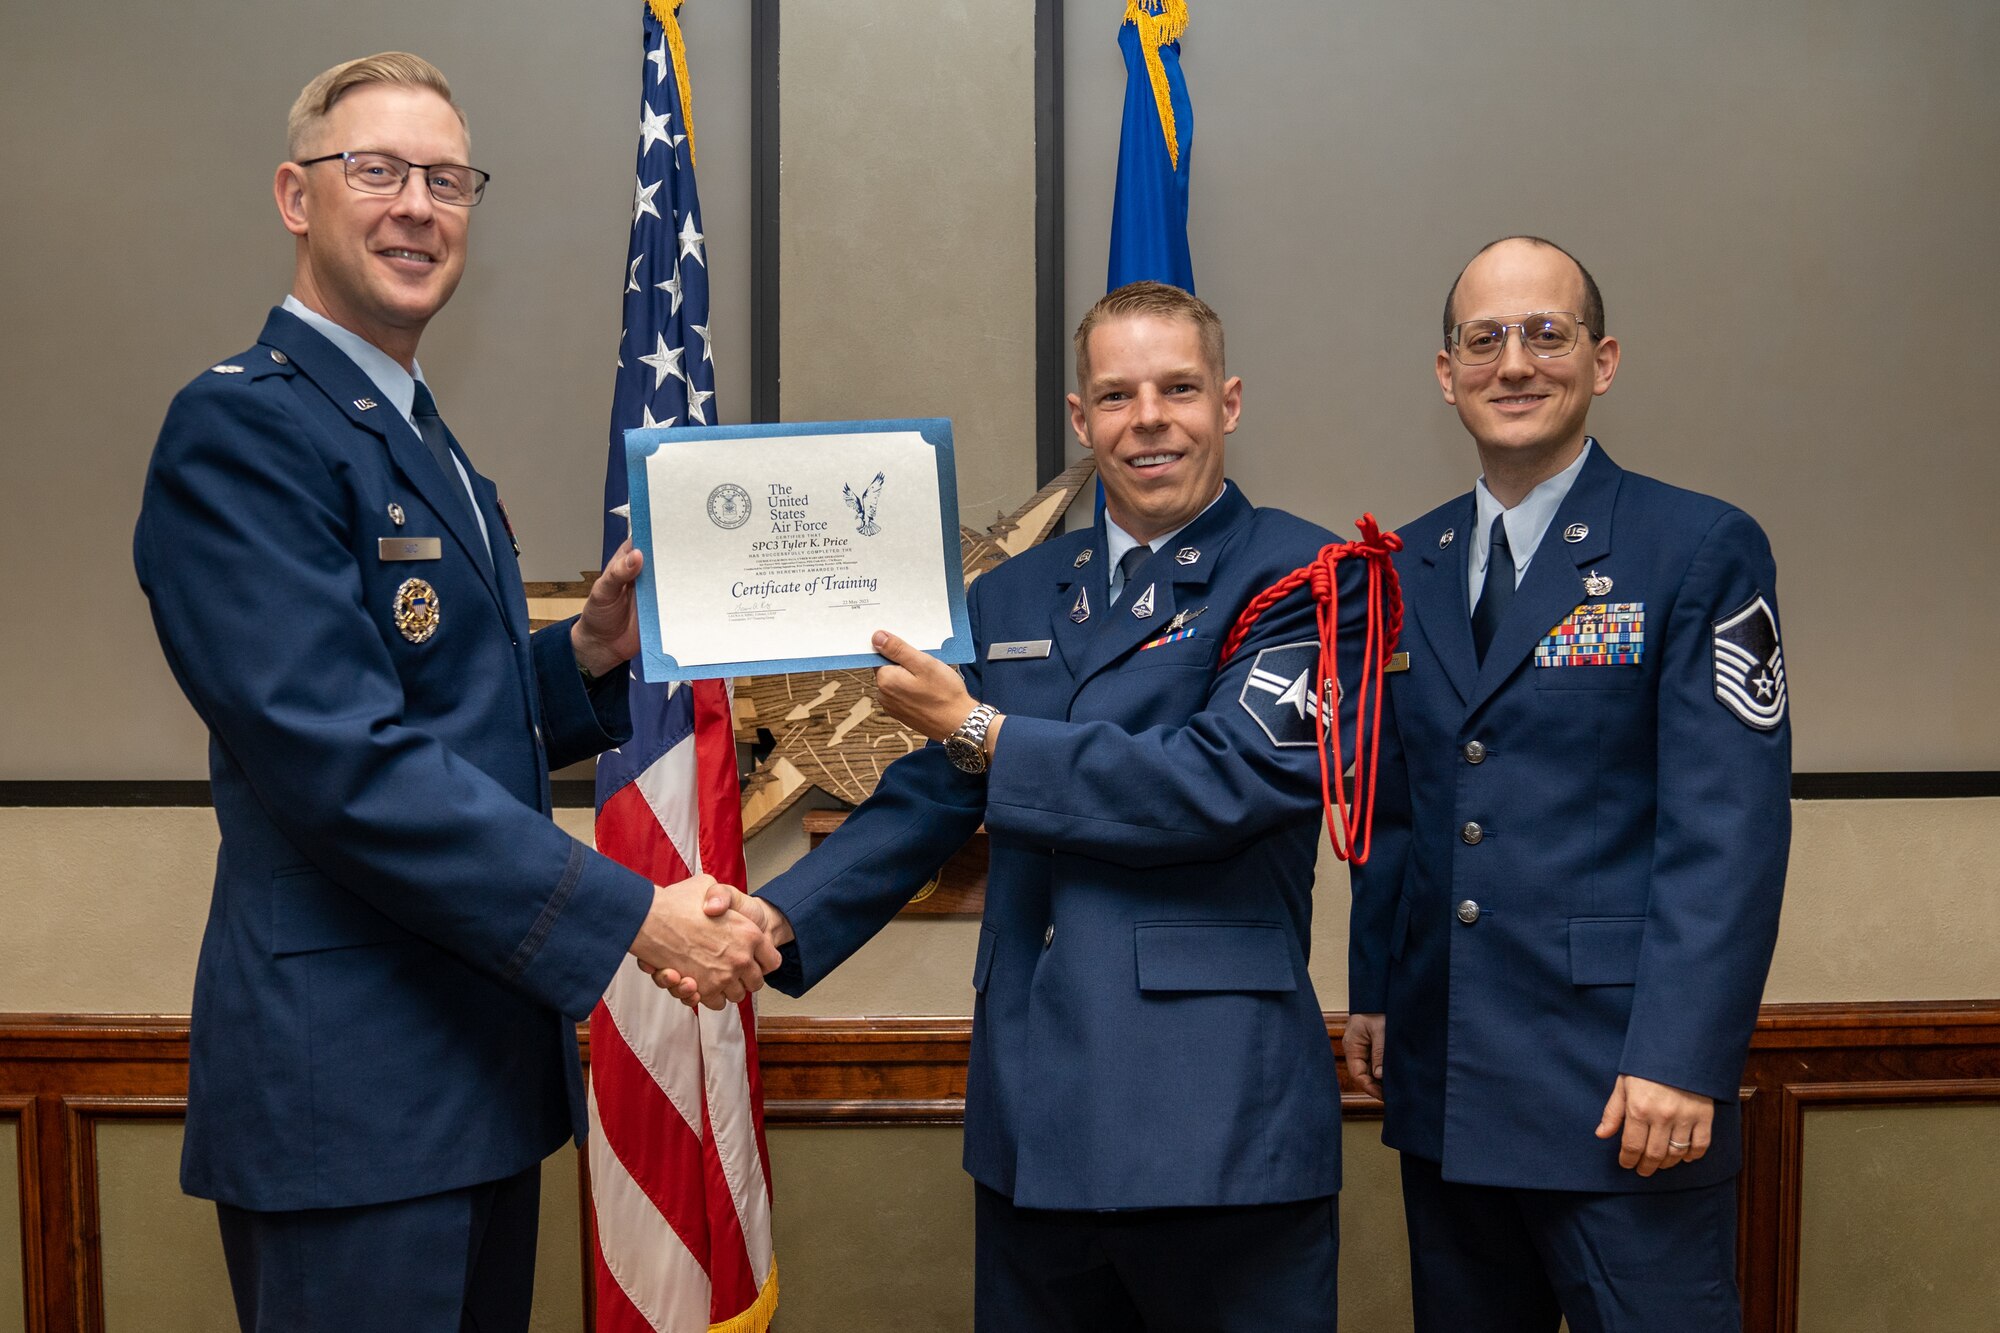 U.S. Space Force Specialist 3 Tyler Price, Cyber Warfare student, receives his certificate of training during a graduation ceremony at Keesler Air Force Base, Mississippi, May 22, 2023.